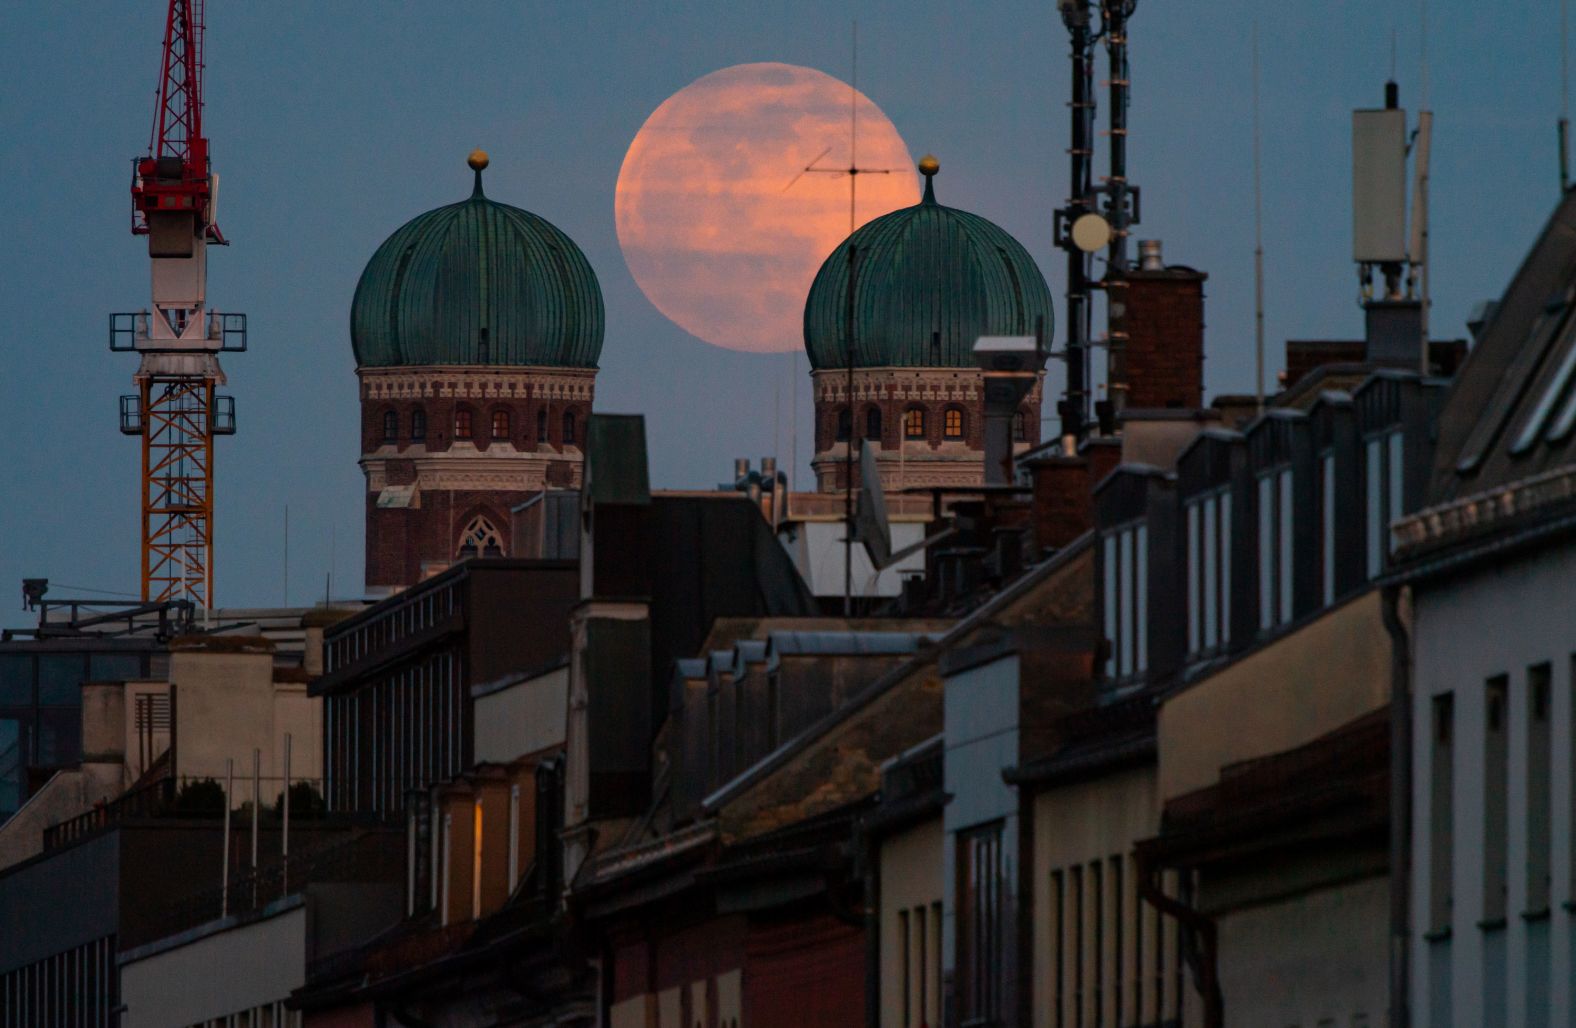 The full moon stands between the twin towers of the Frauenkirche cathedral, in Munich, Germany.